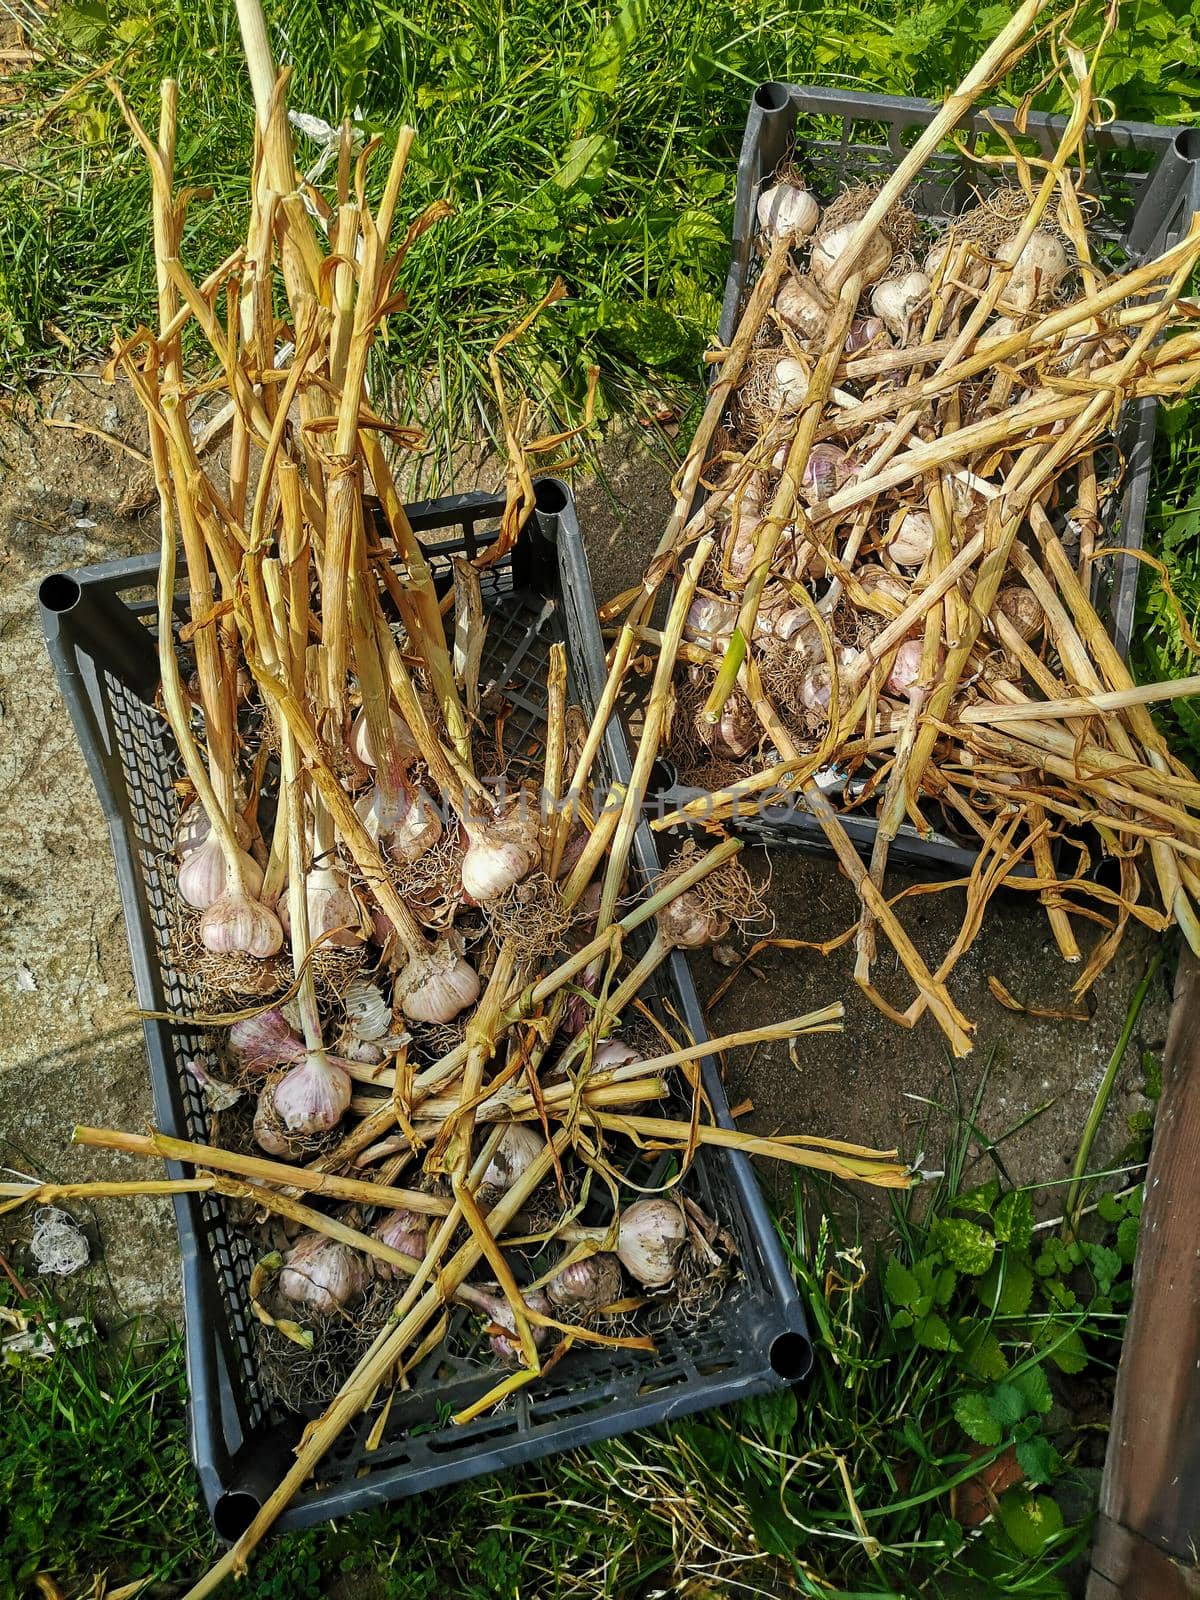 Freshly harvested garlic lies in boxes on the ground in the garden, along with roots and leaves